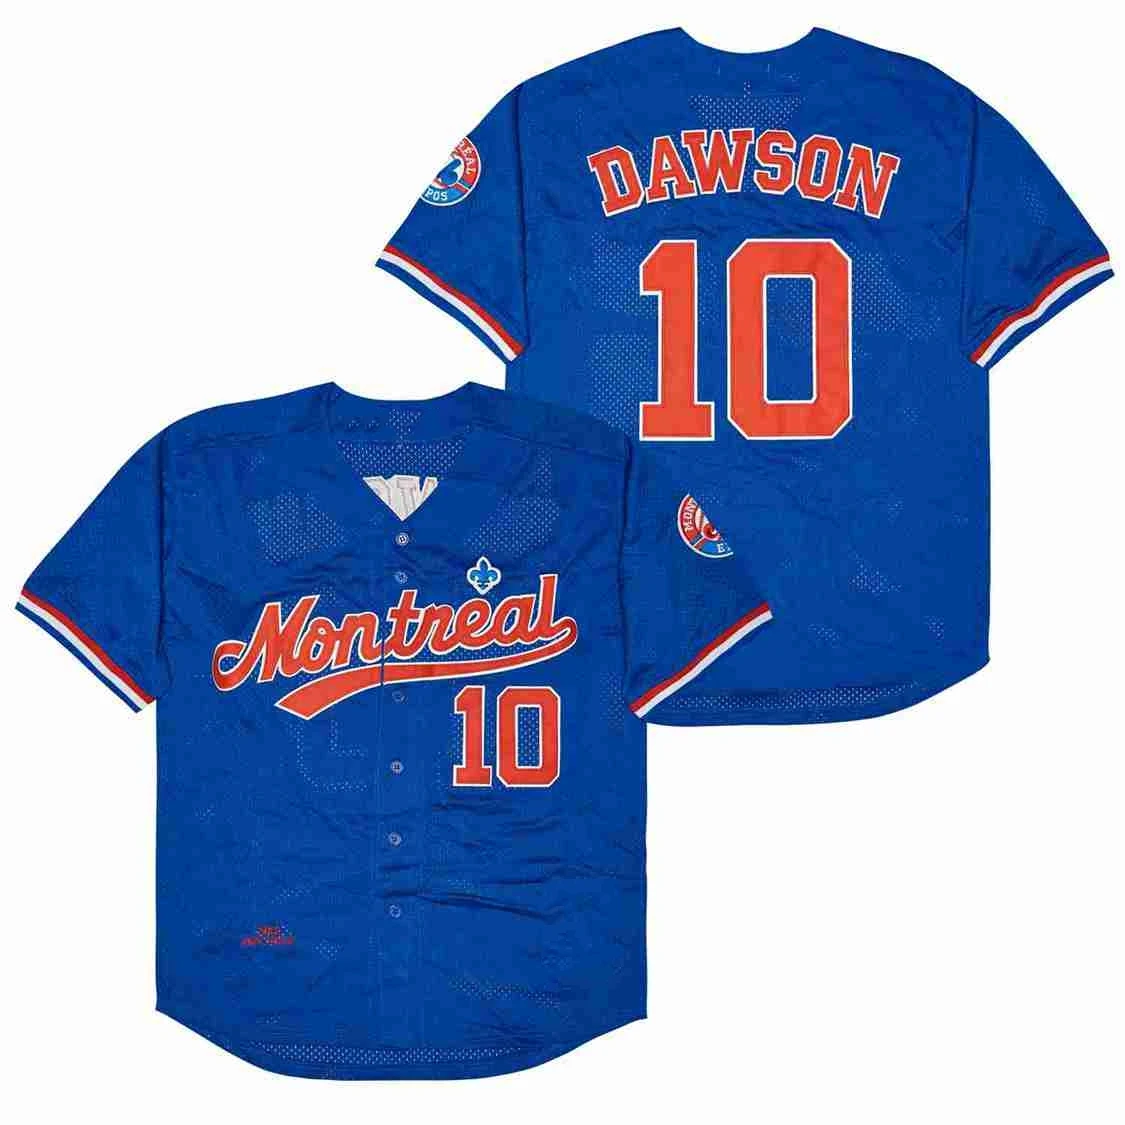 

Baseball Jersey Montreal 8 Carter 27 Guerrero 45 Martinez 10 Dawson Jerseys Sports Outdoor Sewing Embroidery Blue High-quality